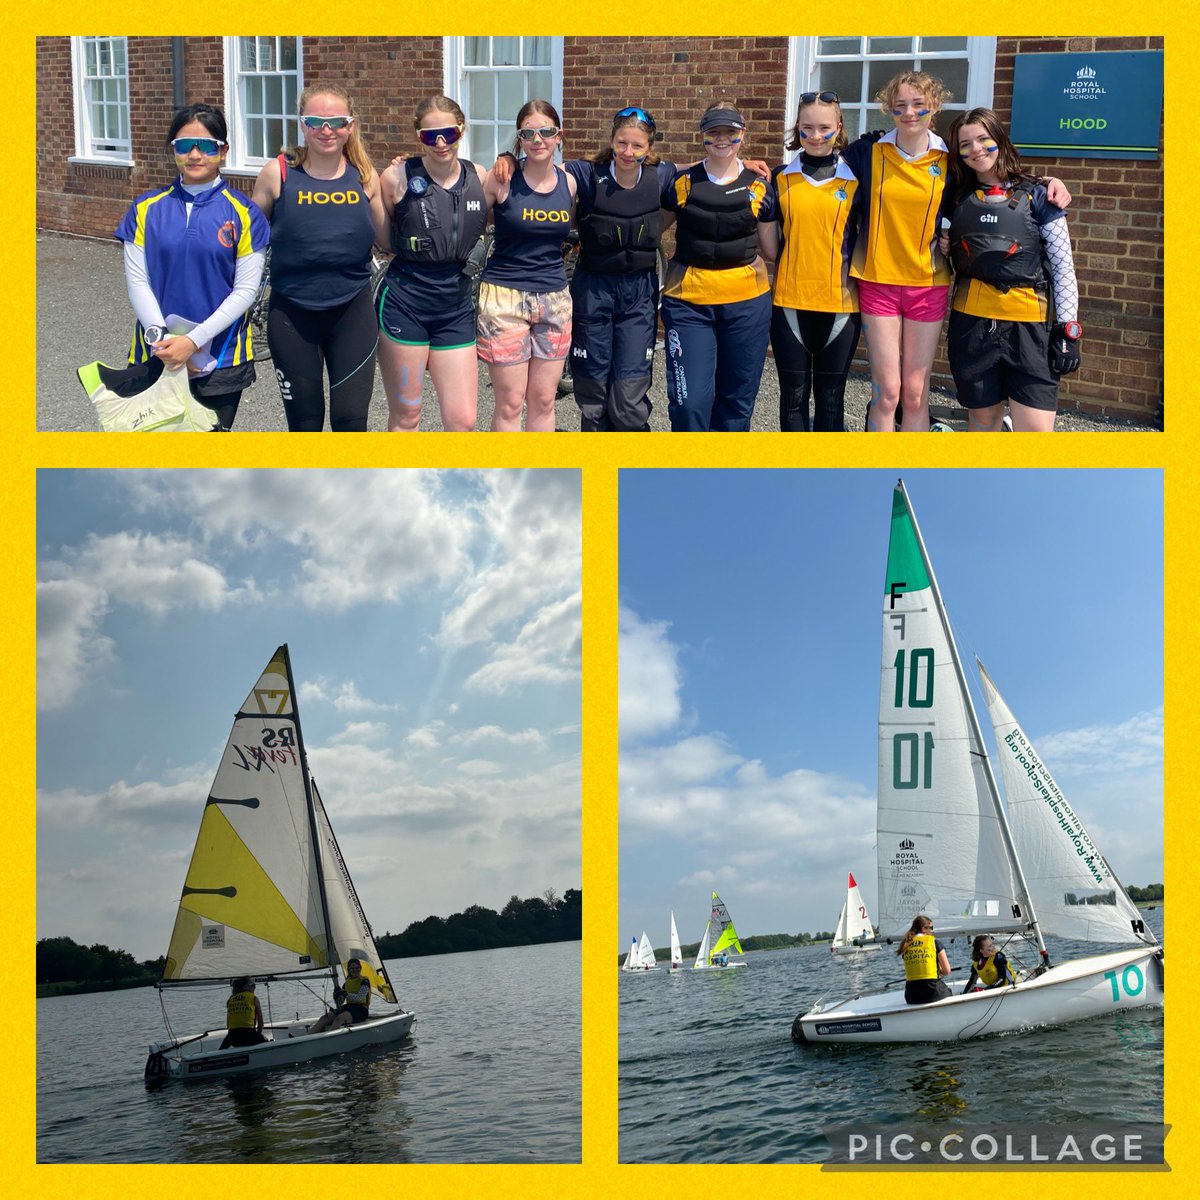 Well done sailors from @RHSHood @RHSSuffolk for a great Inter-House sailing competition at the weekend! Thank you @RHSsailingteam for such a fun and well-organised event! ⛵️ @RHSSport #PartofRHS 💛💙⚓️🐝